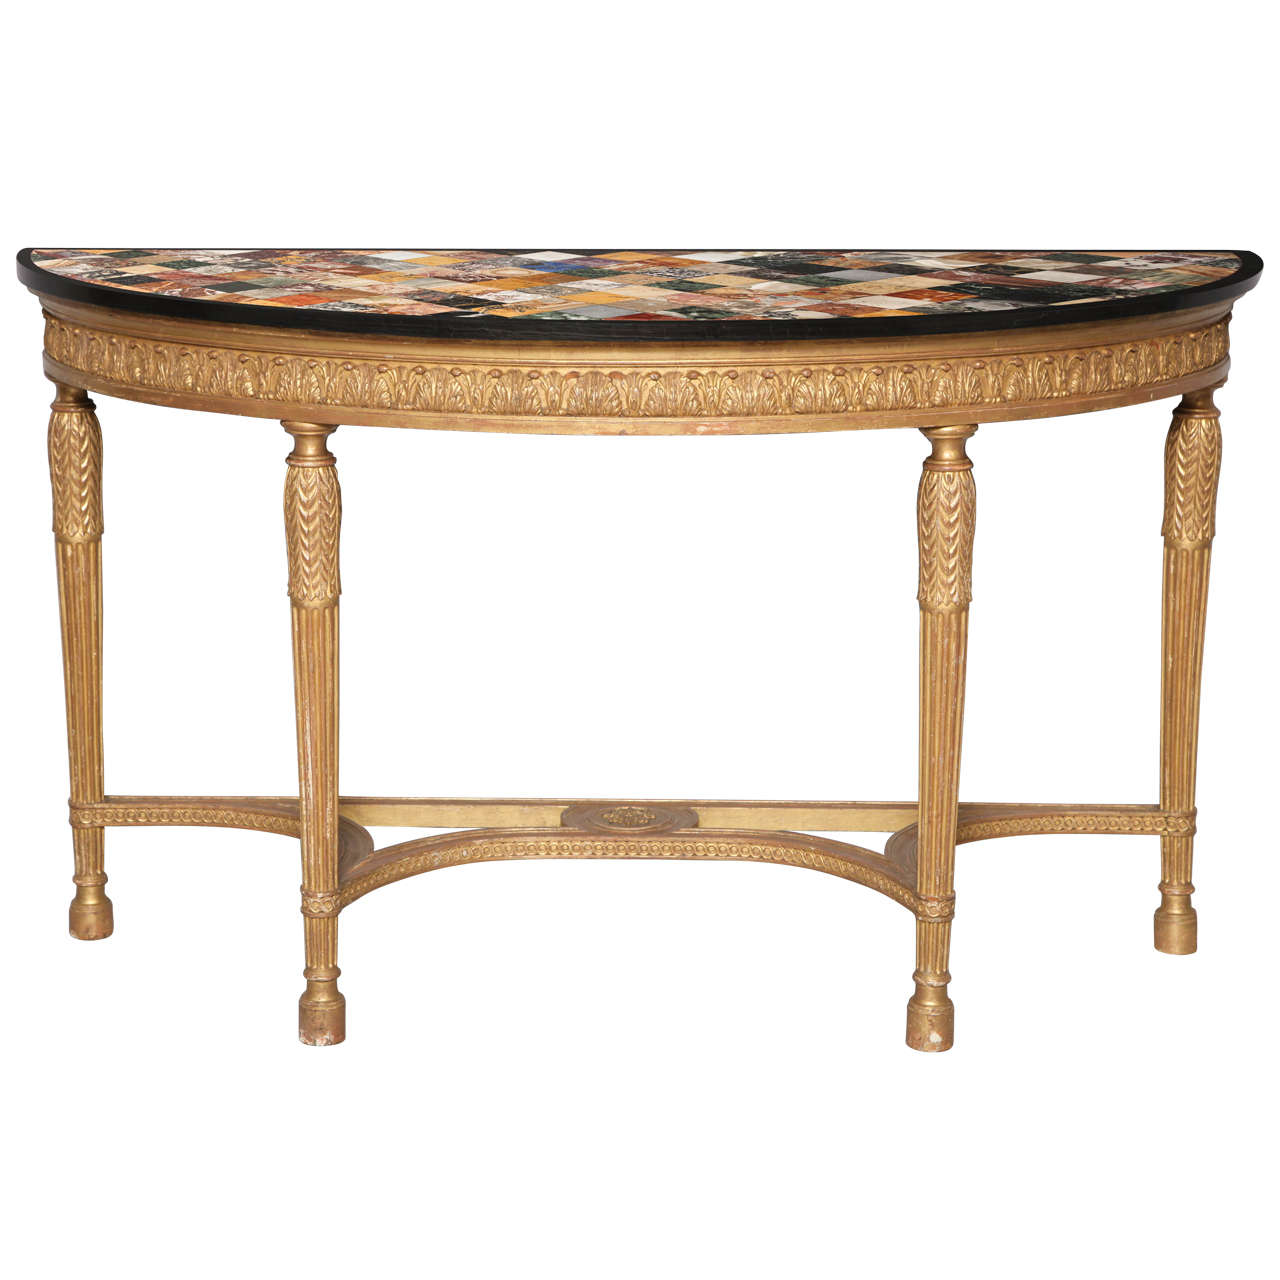 Important George III Giltwood Console Table